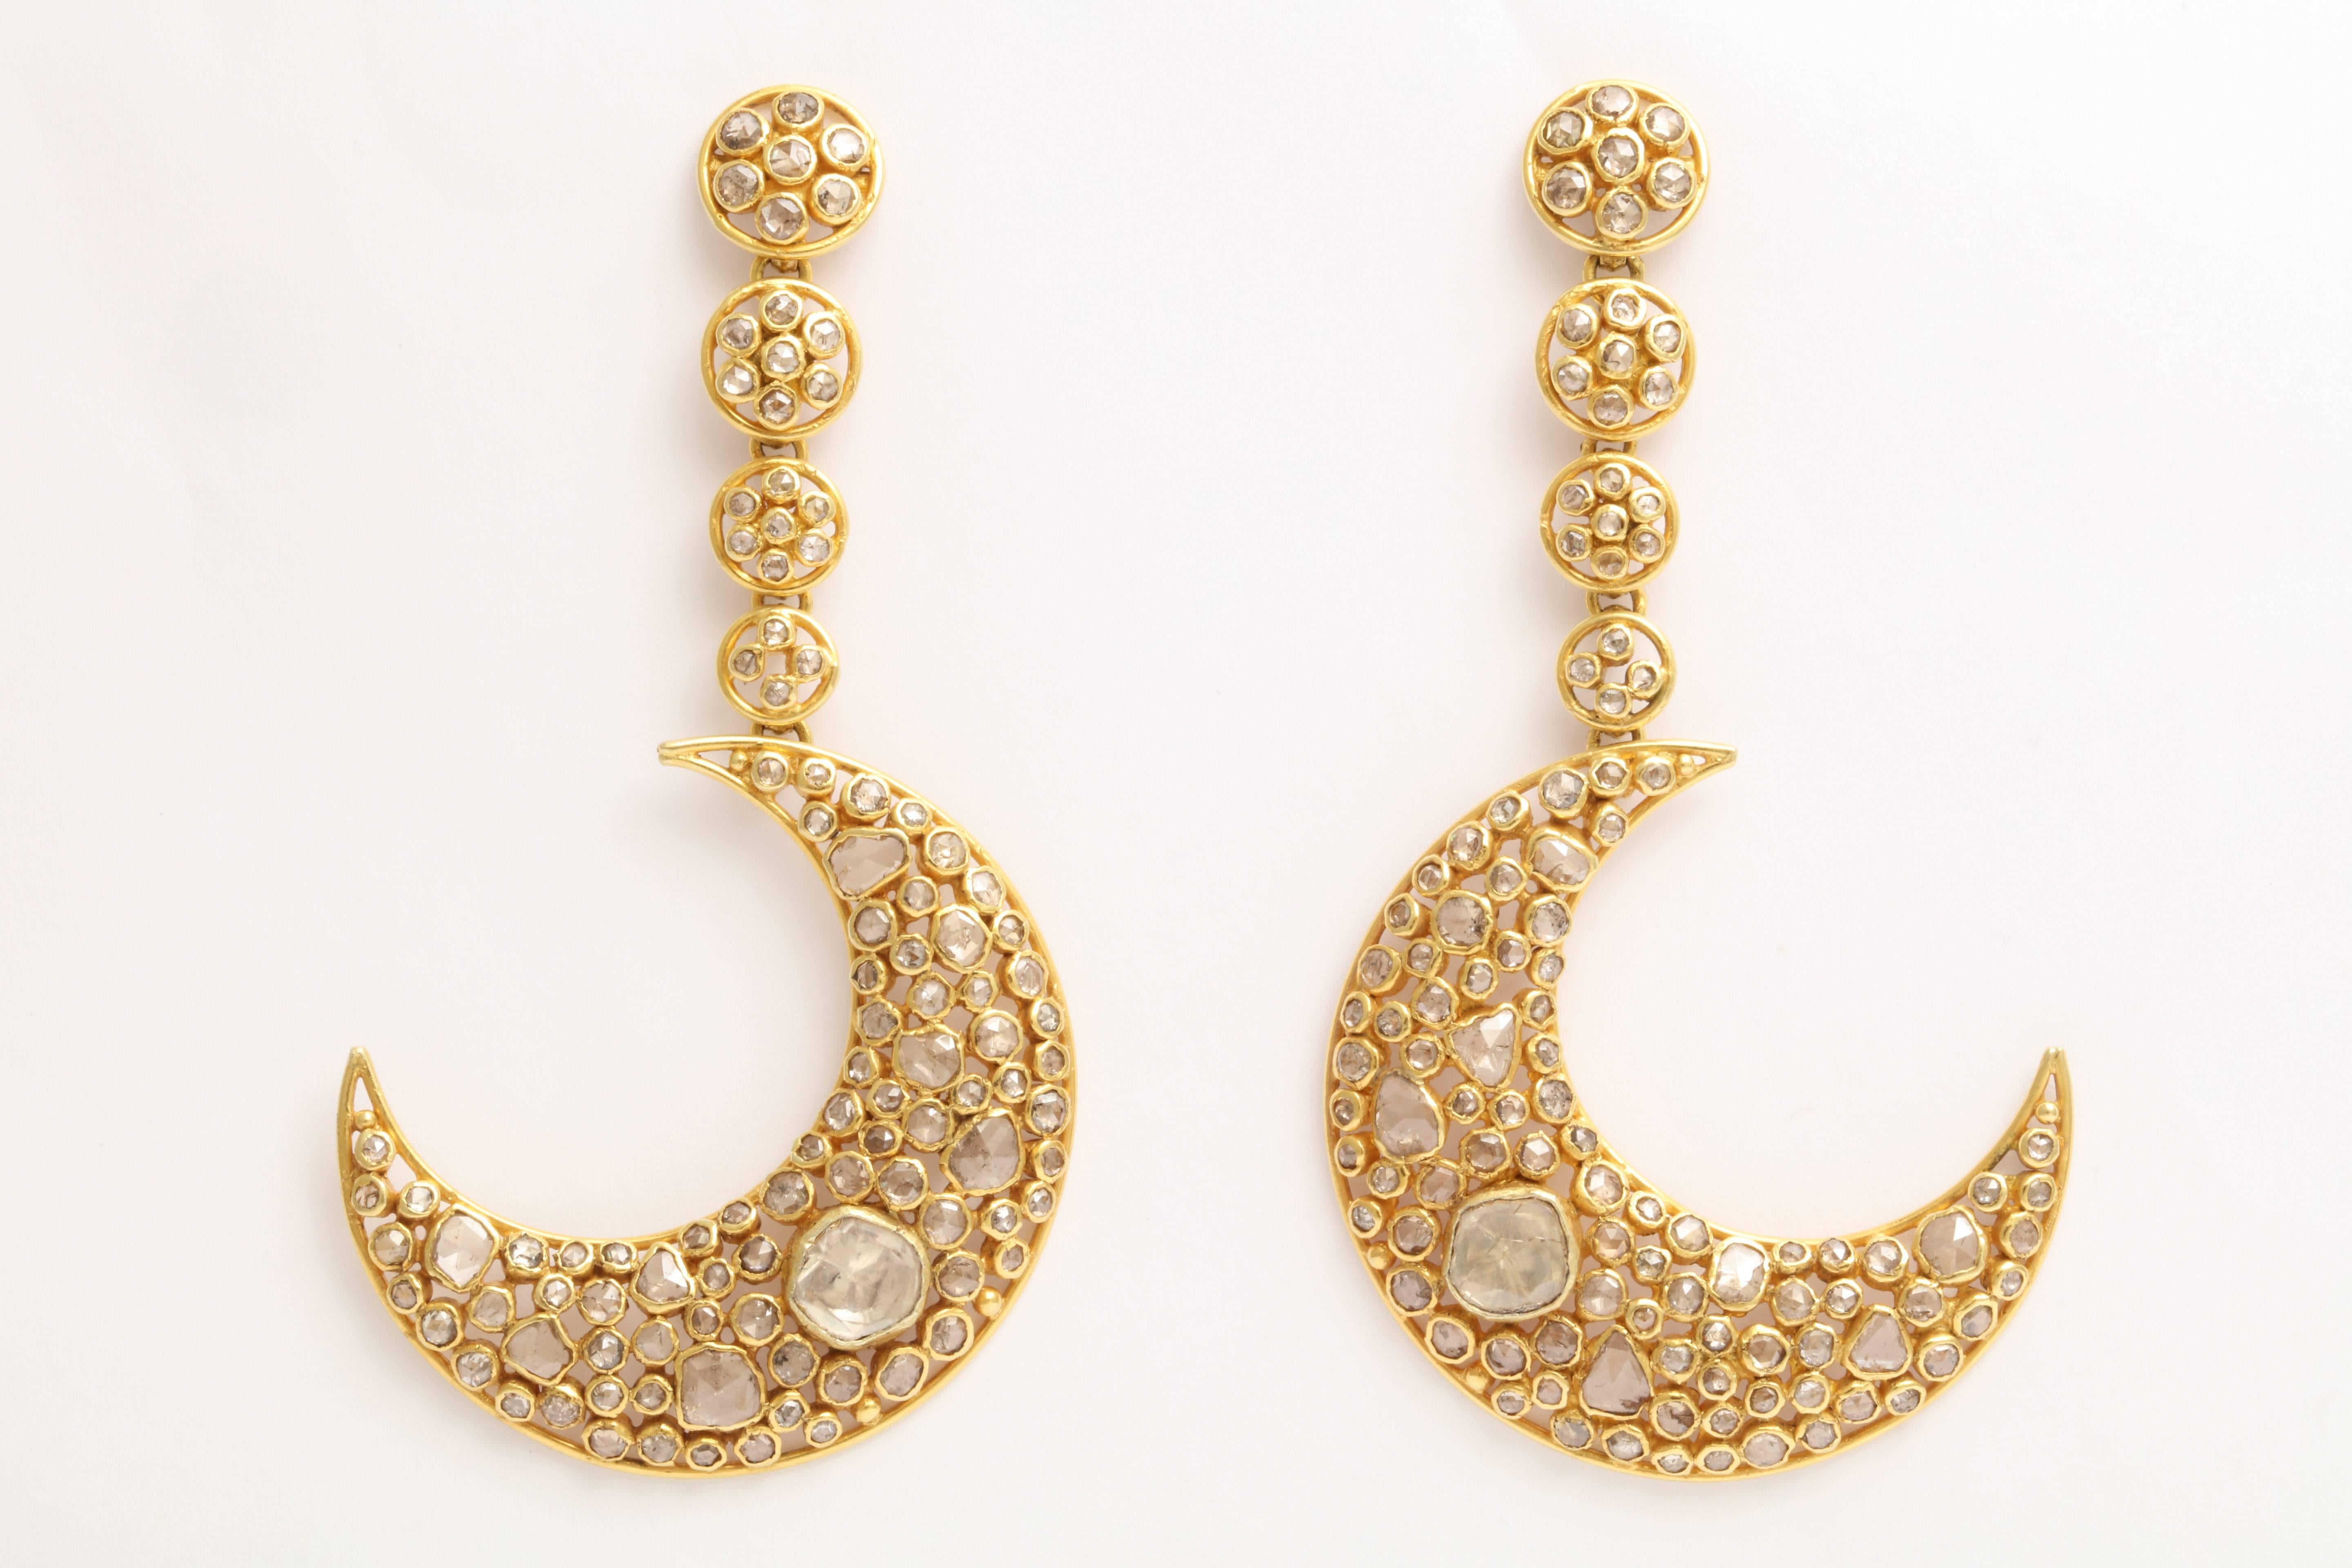 A pair of 18kt yellow gold and diamond moon earrings. The moons are suspended from graduated 18kt yellow gold and diamond set discs. The moons and discs are filled with bezel set rose cut diamonds and polki diamonds.
The approximate diamond weight